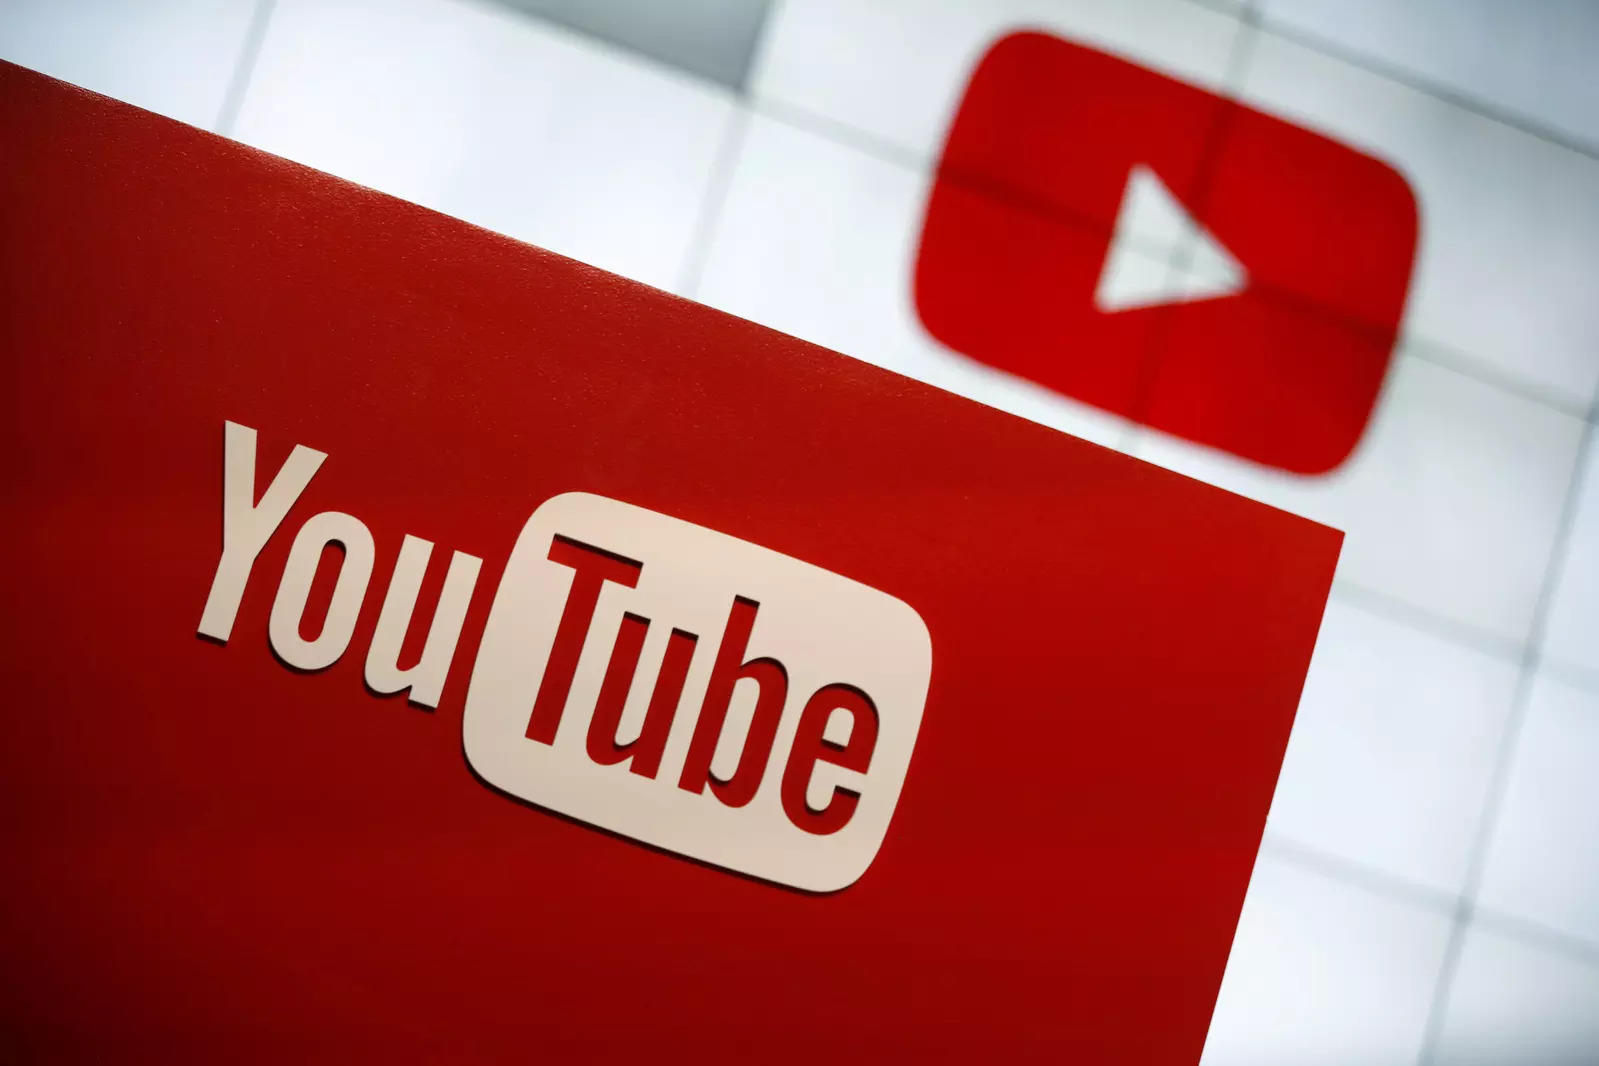 YouTube testing automatic product detection in videos